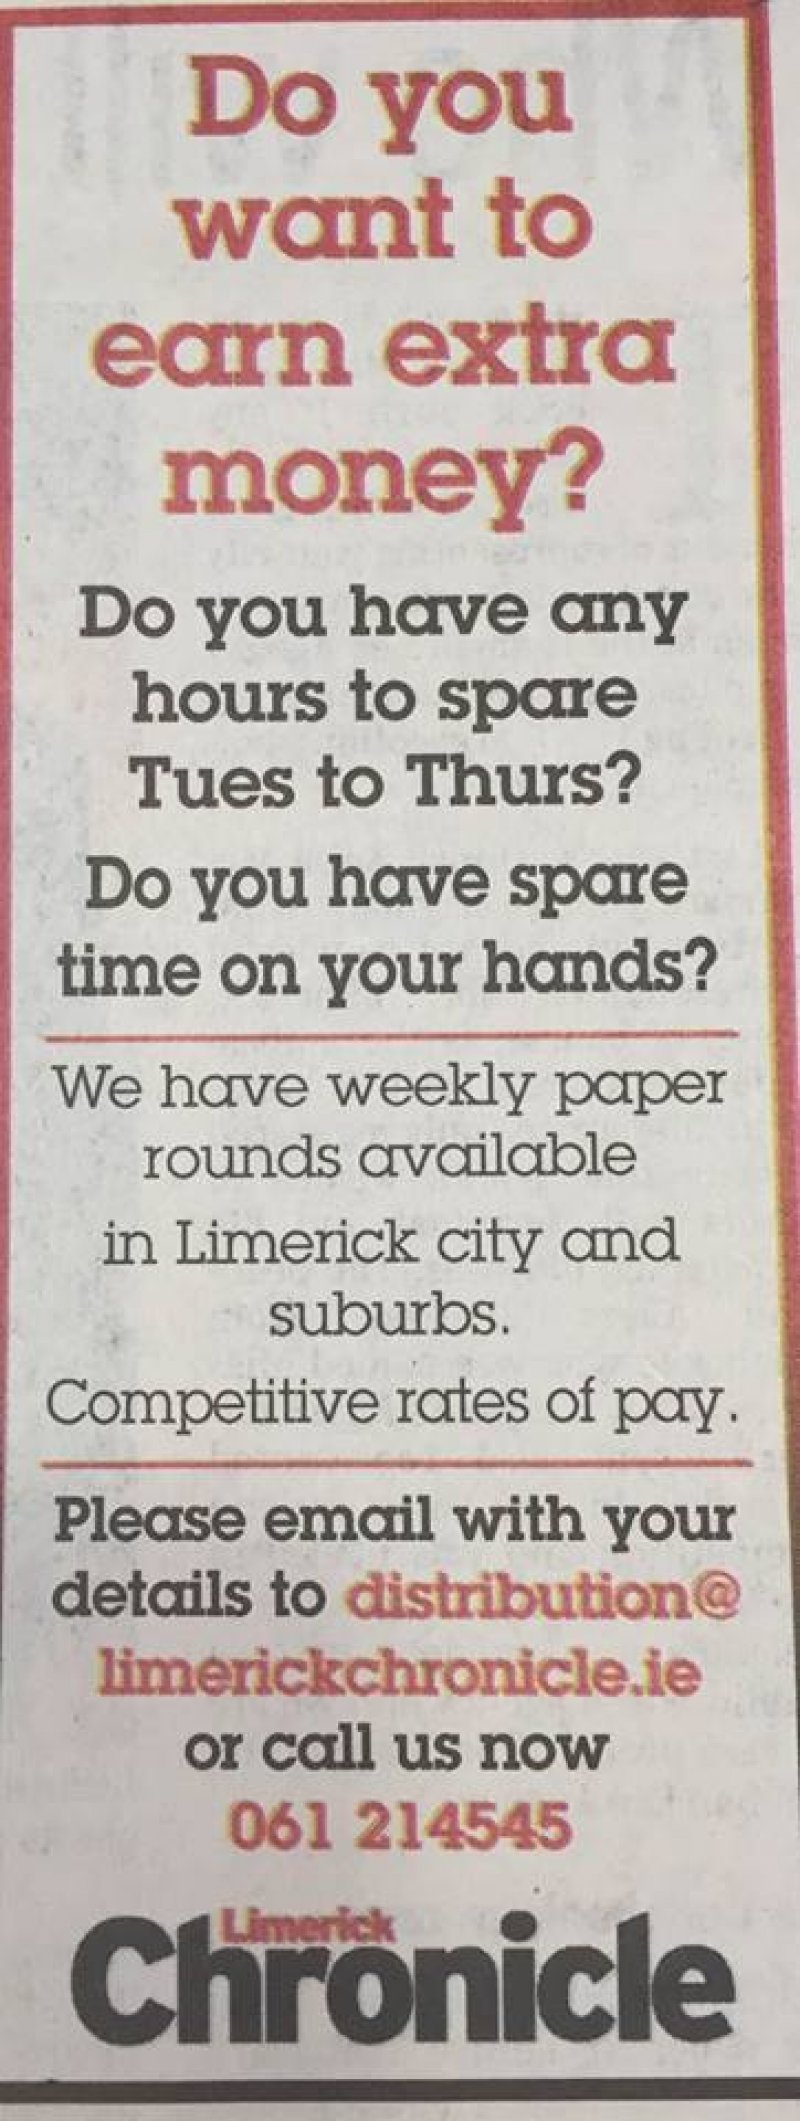 Limerick Leader - Do You Want to Earn Extra Money?